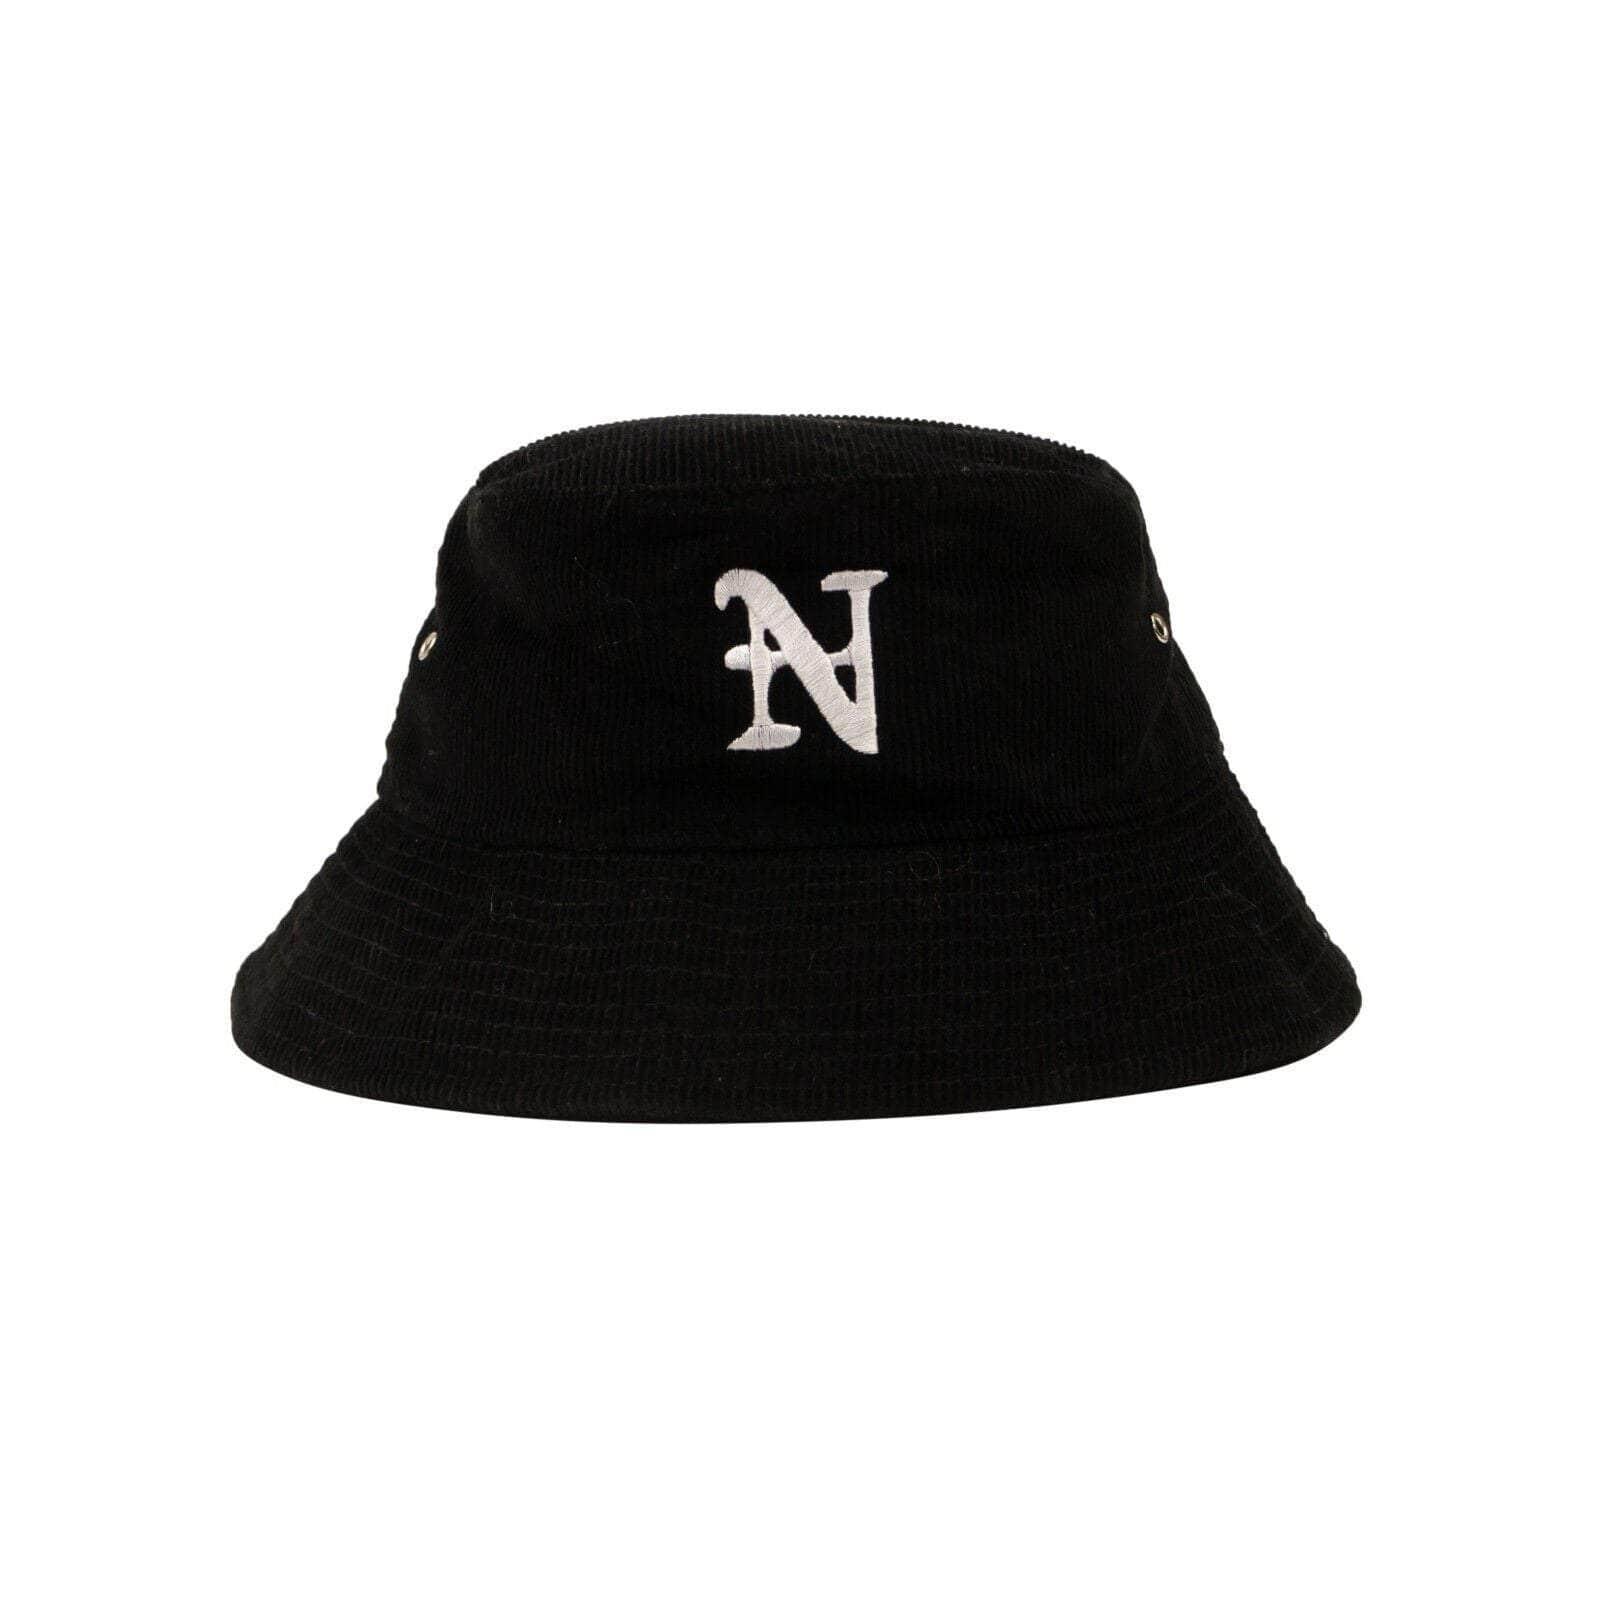 Nahmias channelenable-all, chicmi, couponcollection, gender-mens, main-accessories, mens-shoes, nahmias, size-os, under-250 OS Black Cotton Corduroy Bucket Hat NMS-XACC-0001/OS NMS-XACC-0001/OS